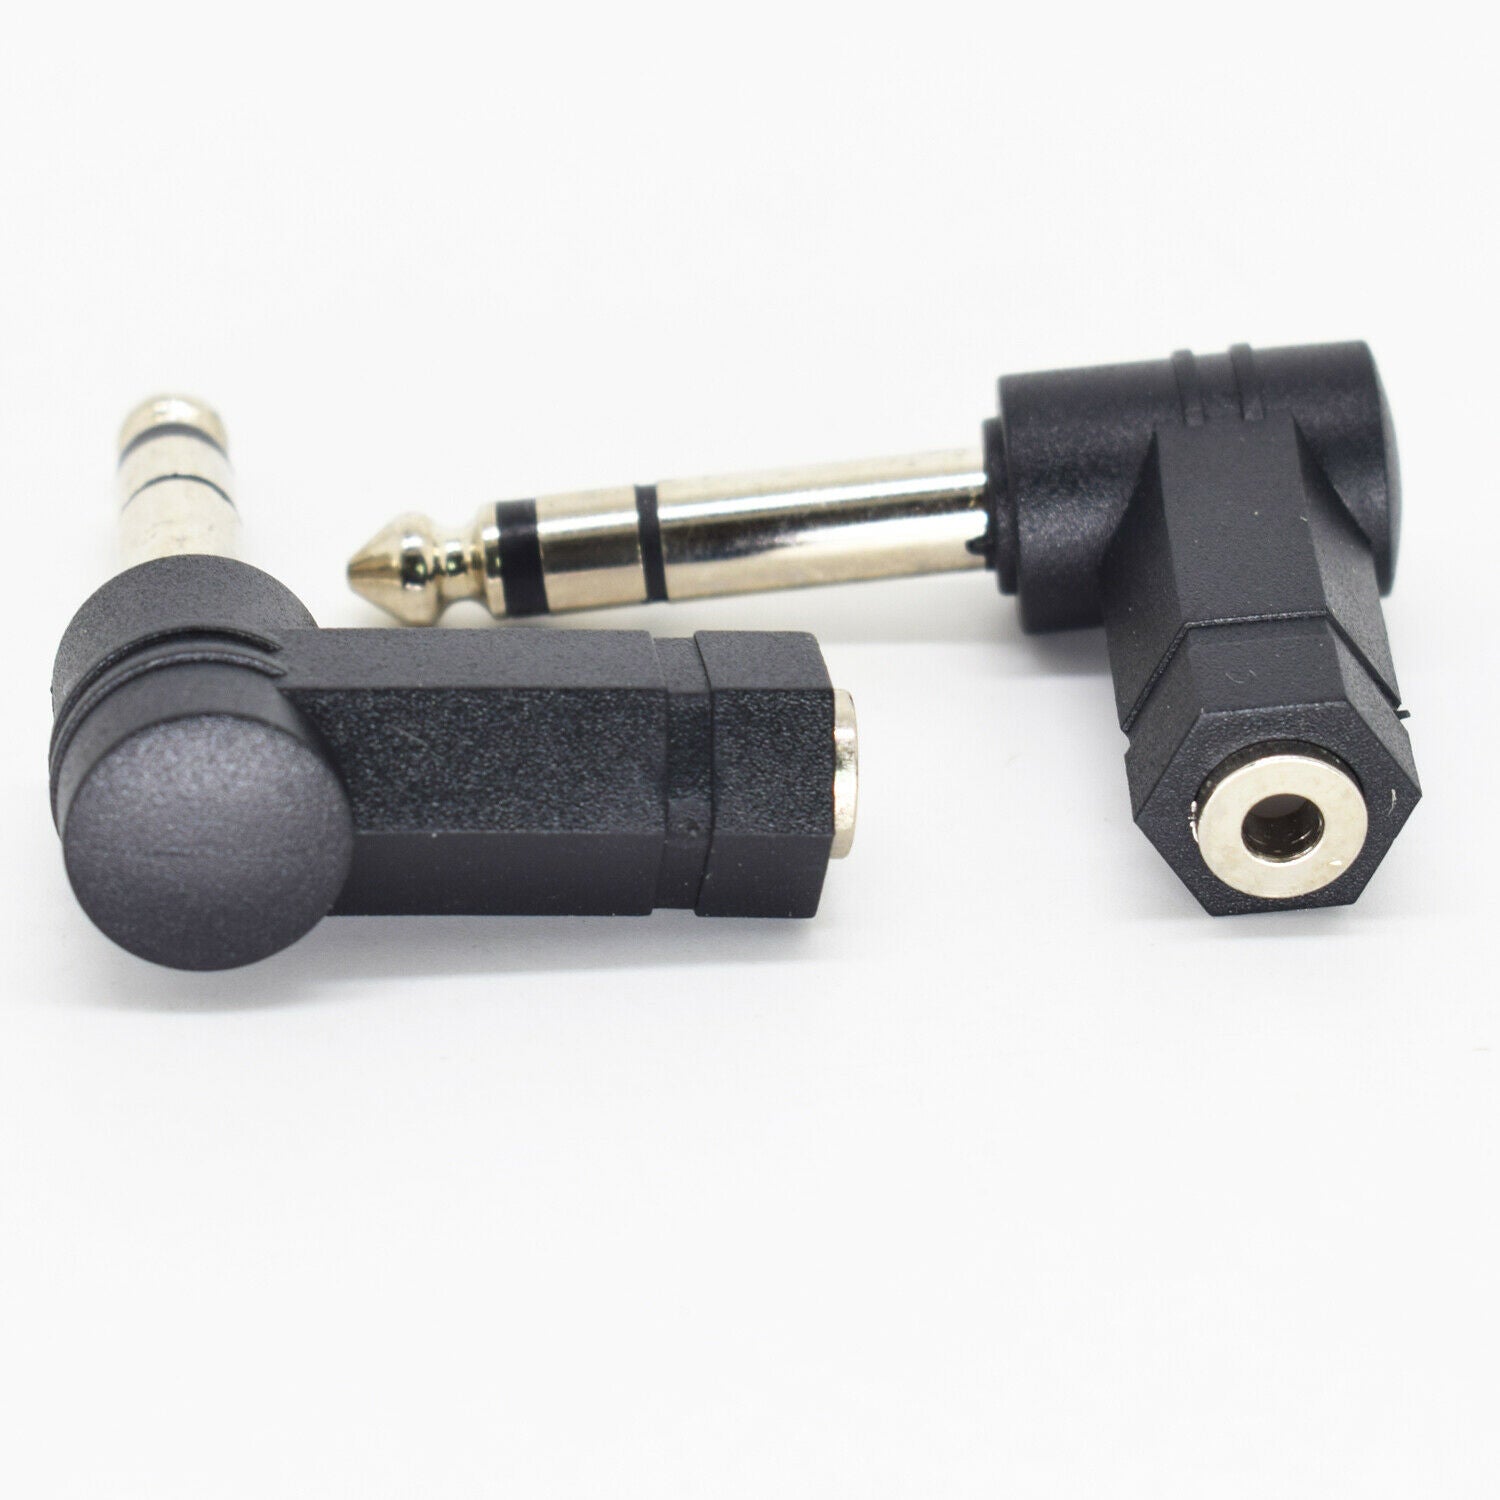 1pc 6.35mm 1/4" Stereo Male to 3.5mm 1/8" Female Right Angle Audio MIC Adapter